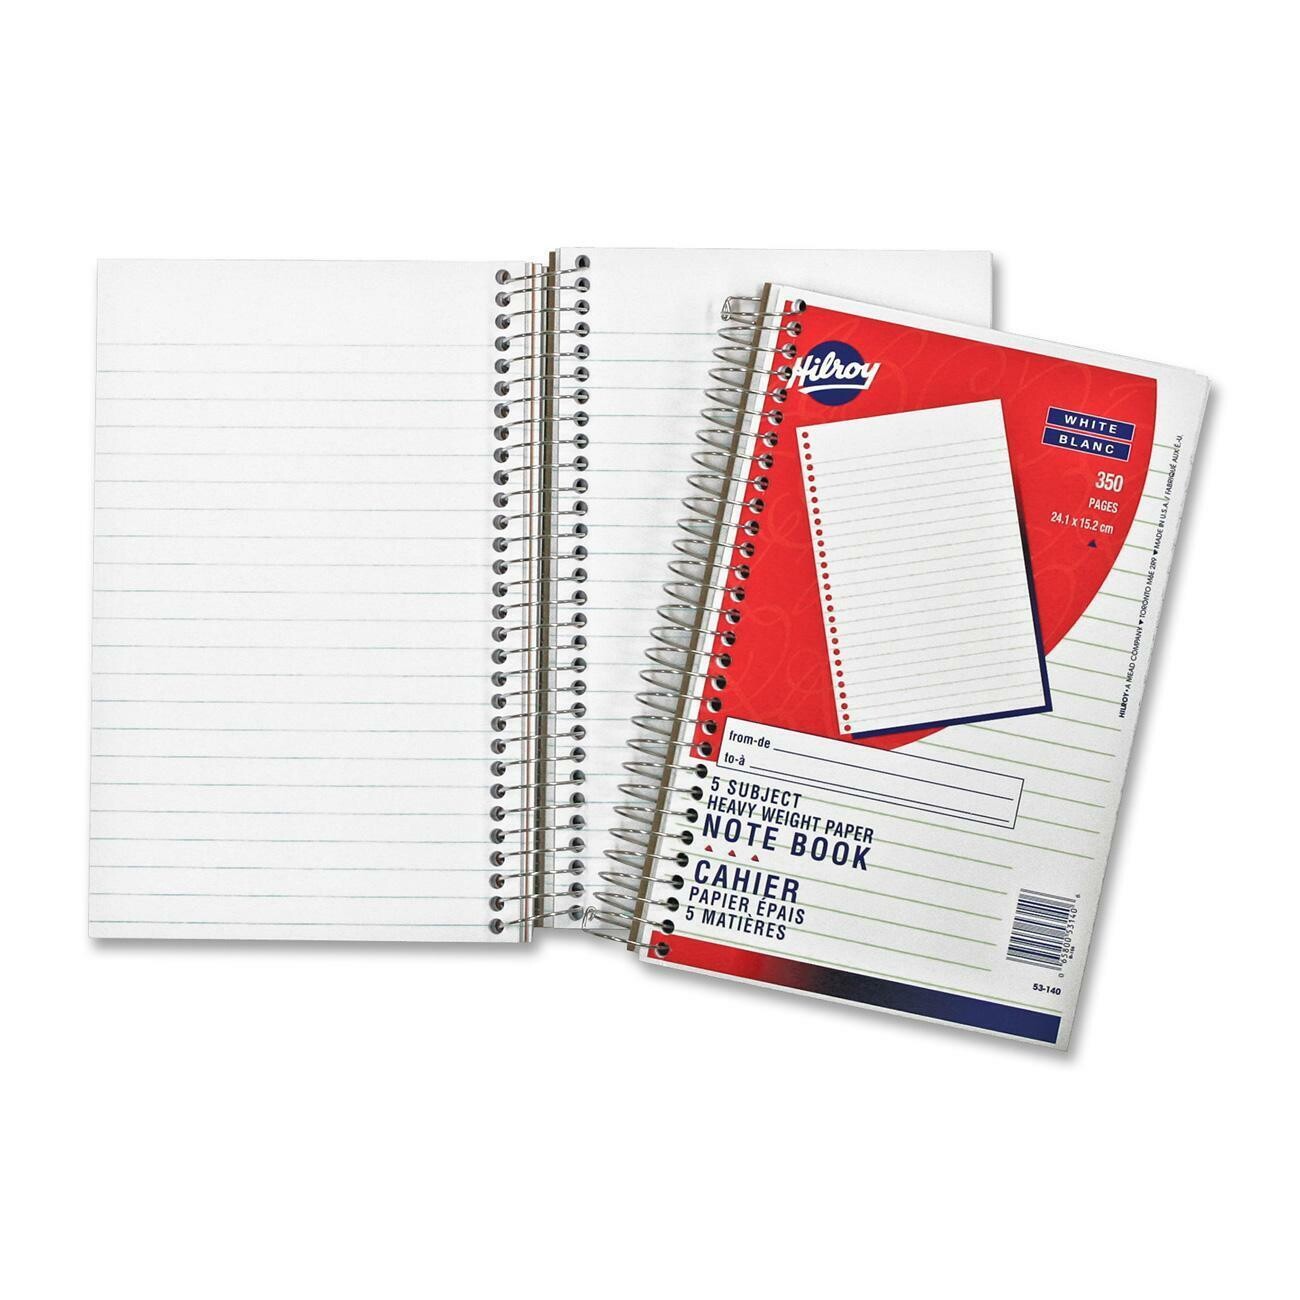 Notebook, Exercise, 6" x 9 1/2" 350 Pages, 5 Subject, Hilroy